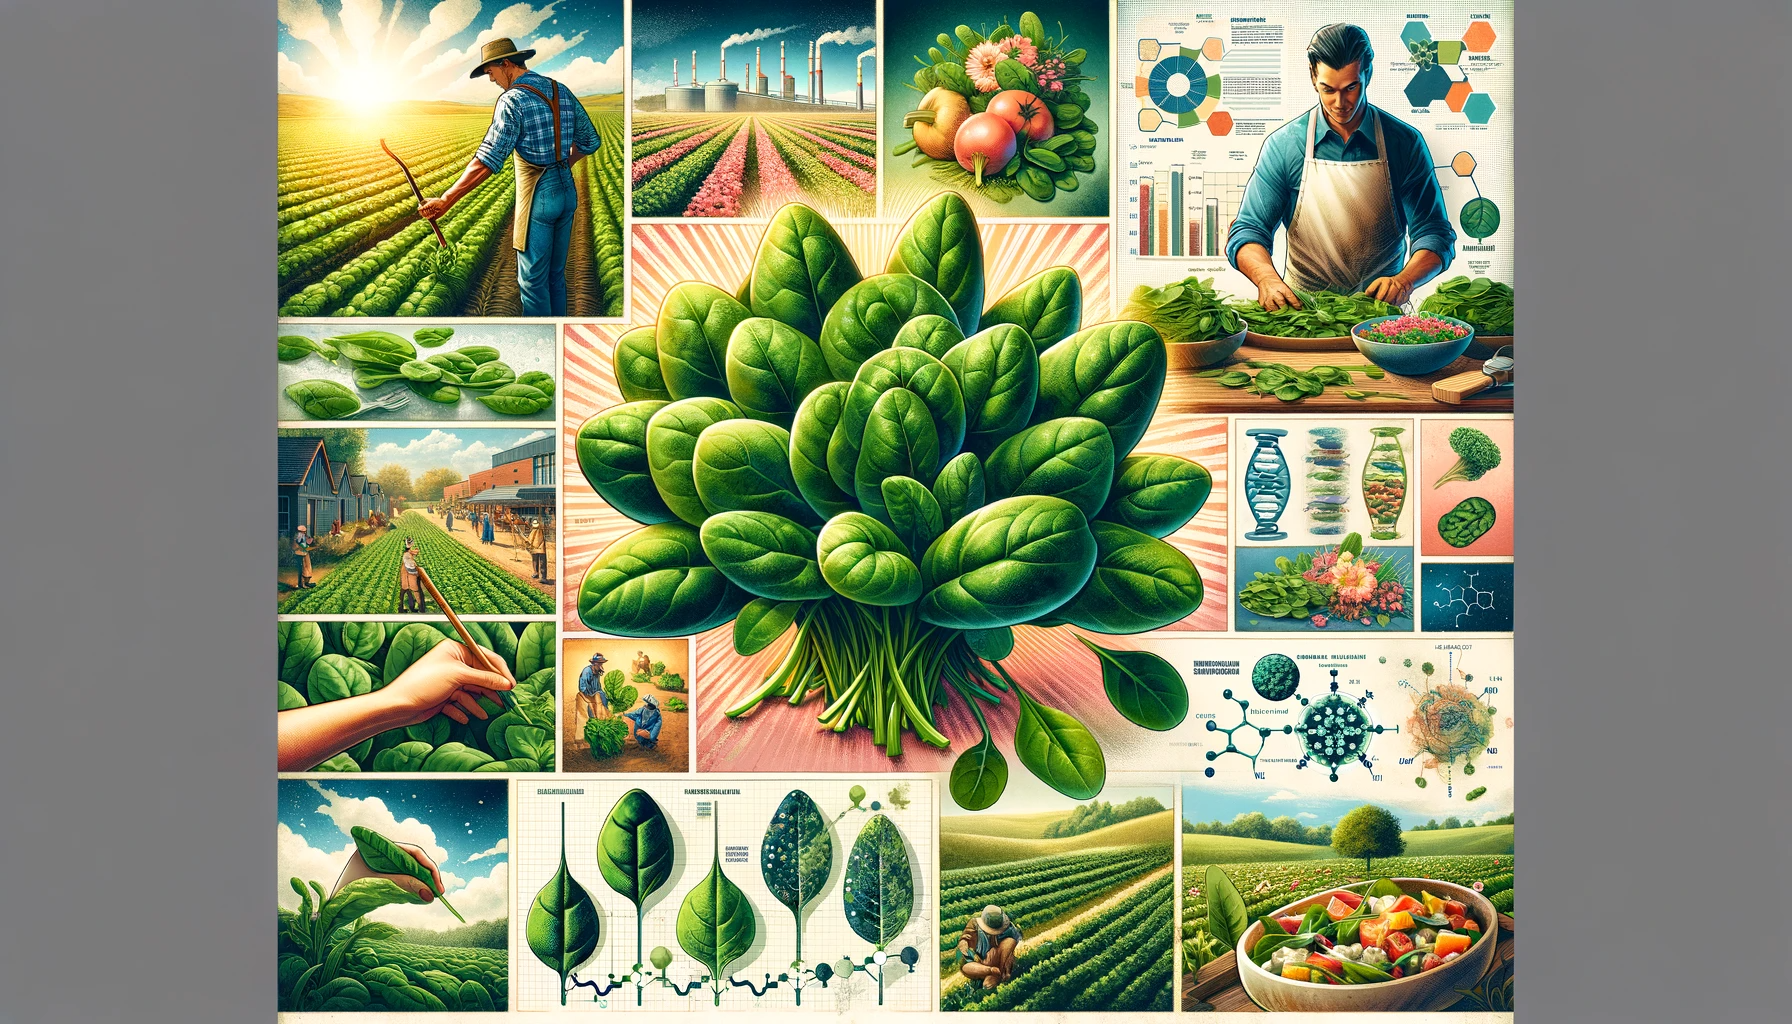 A colorful collage about spinach, featuring different sections each highlighting a unique aspect. One section shows a farmer harvesting spinach in a field, demonstrating agricultural practices. Adjacent to it is a close-up of fresh spinach leaves, emphasizing their vibrant green color and texture. Another part of the collage presents a nutritious spinach salad, symbolizing spinach's role in healthy cuisine. There's also a scientific diagram of spinach at the molecular level, indicating research on its nutritional properties. The final section portrays the historical cultivation of spinach, reflecting its long-standing significance in agriculture.